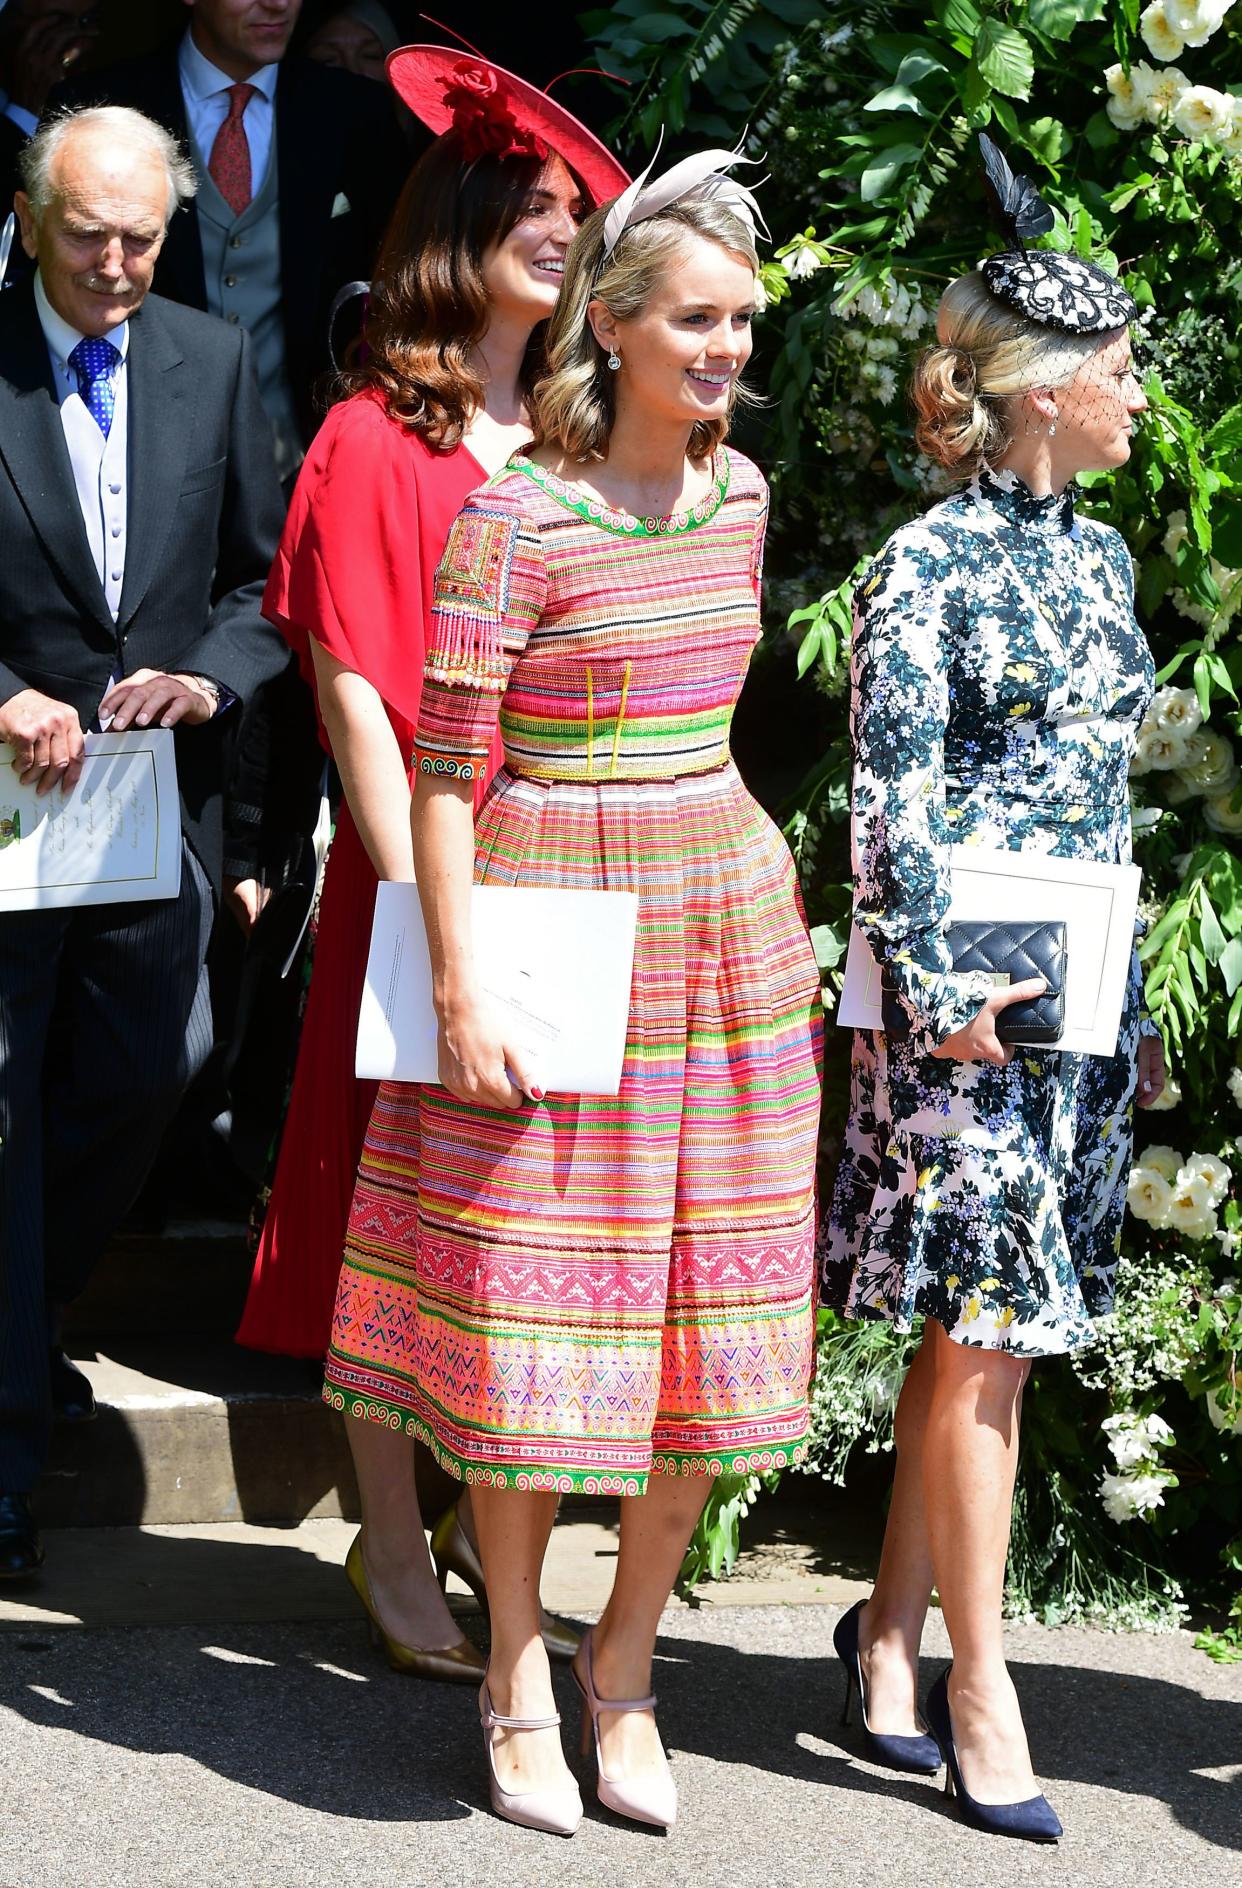 Cressida attended the duke and duchess' royal wedding in May 2018. Photo: Getty Images